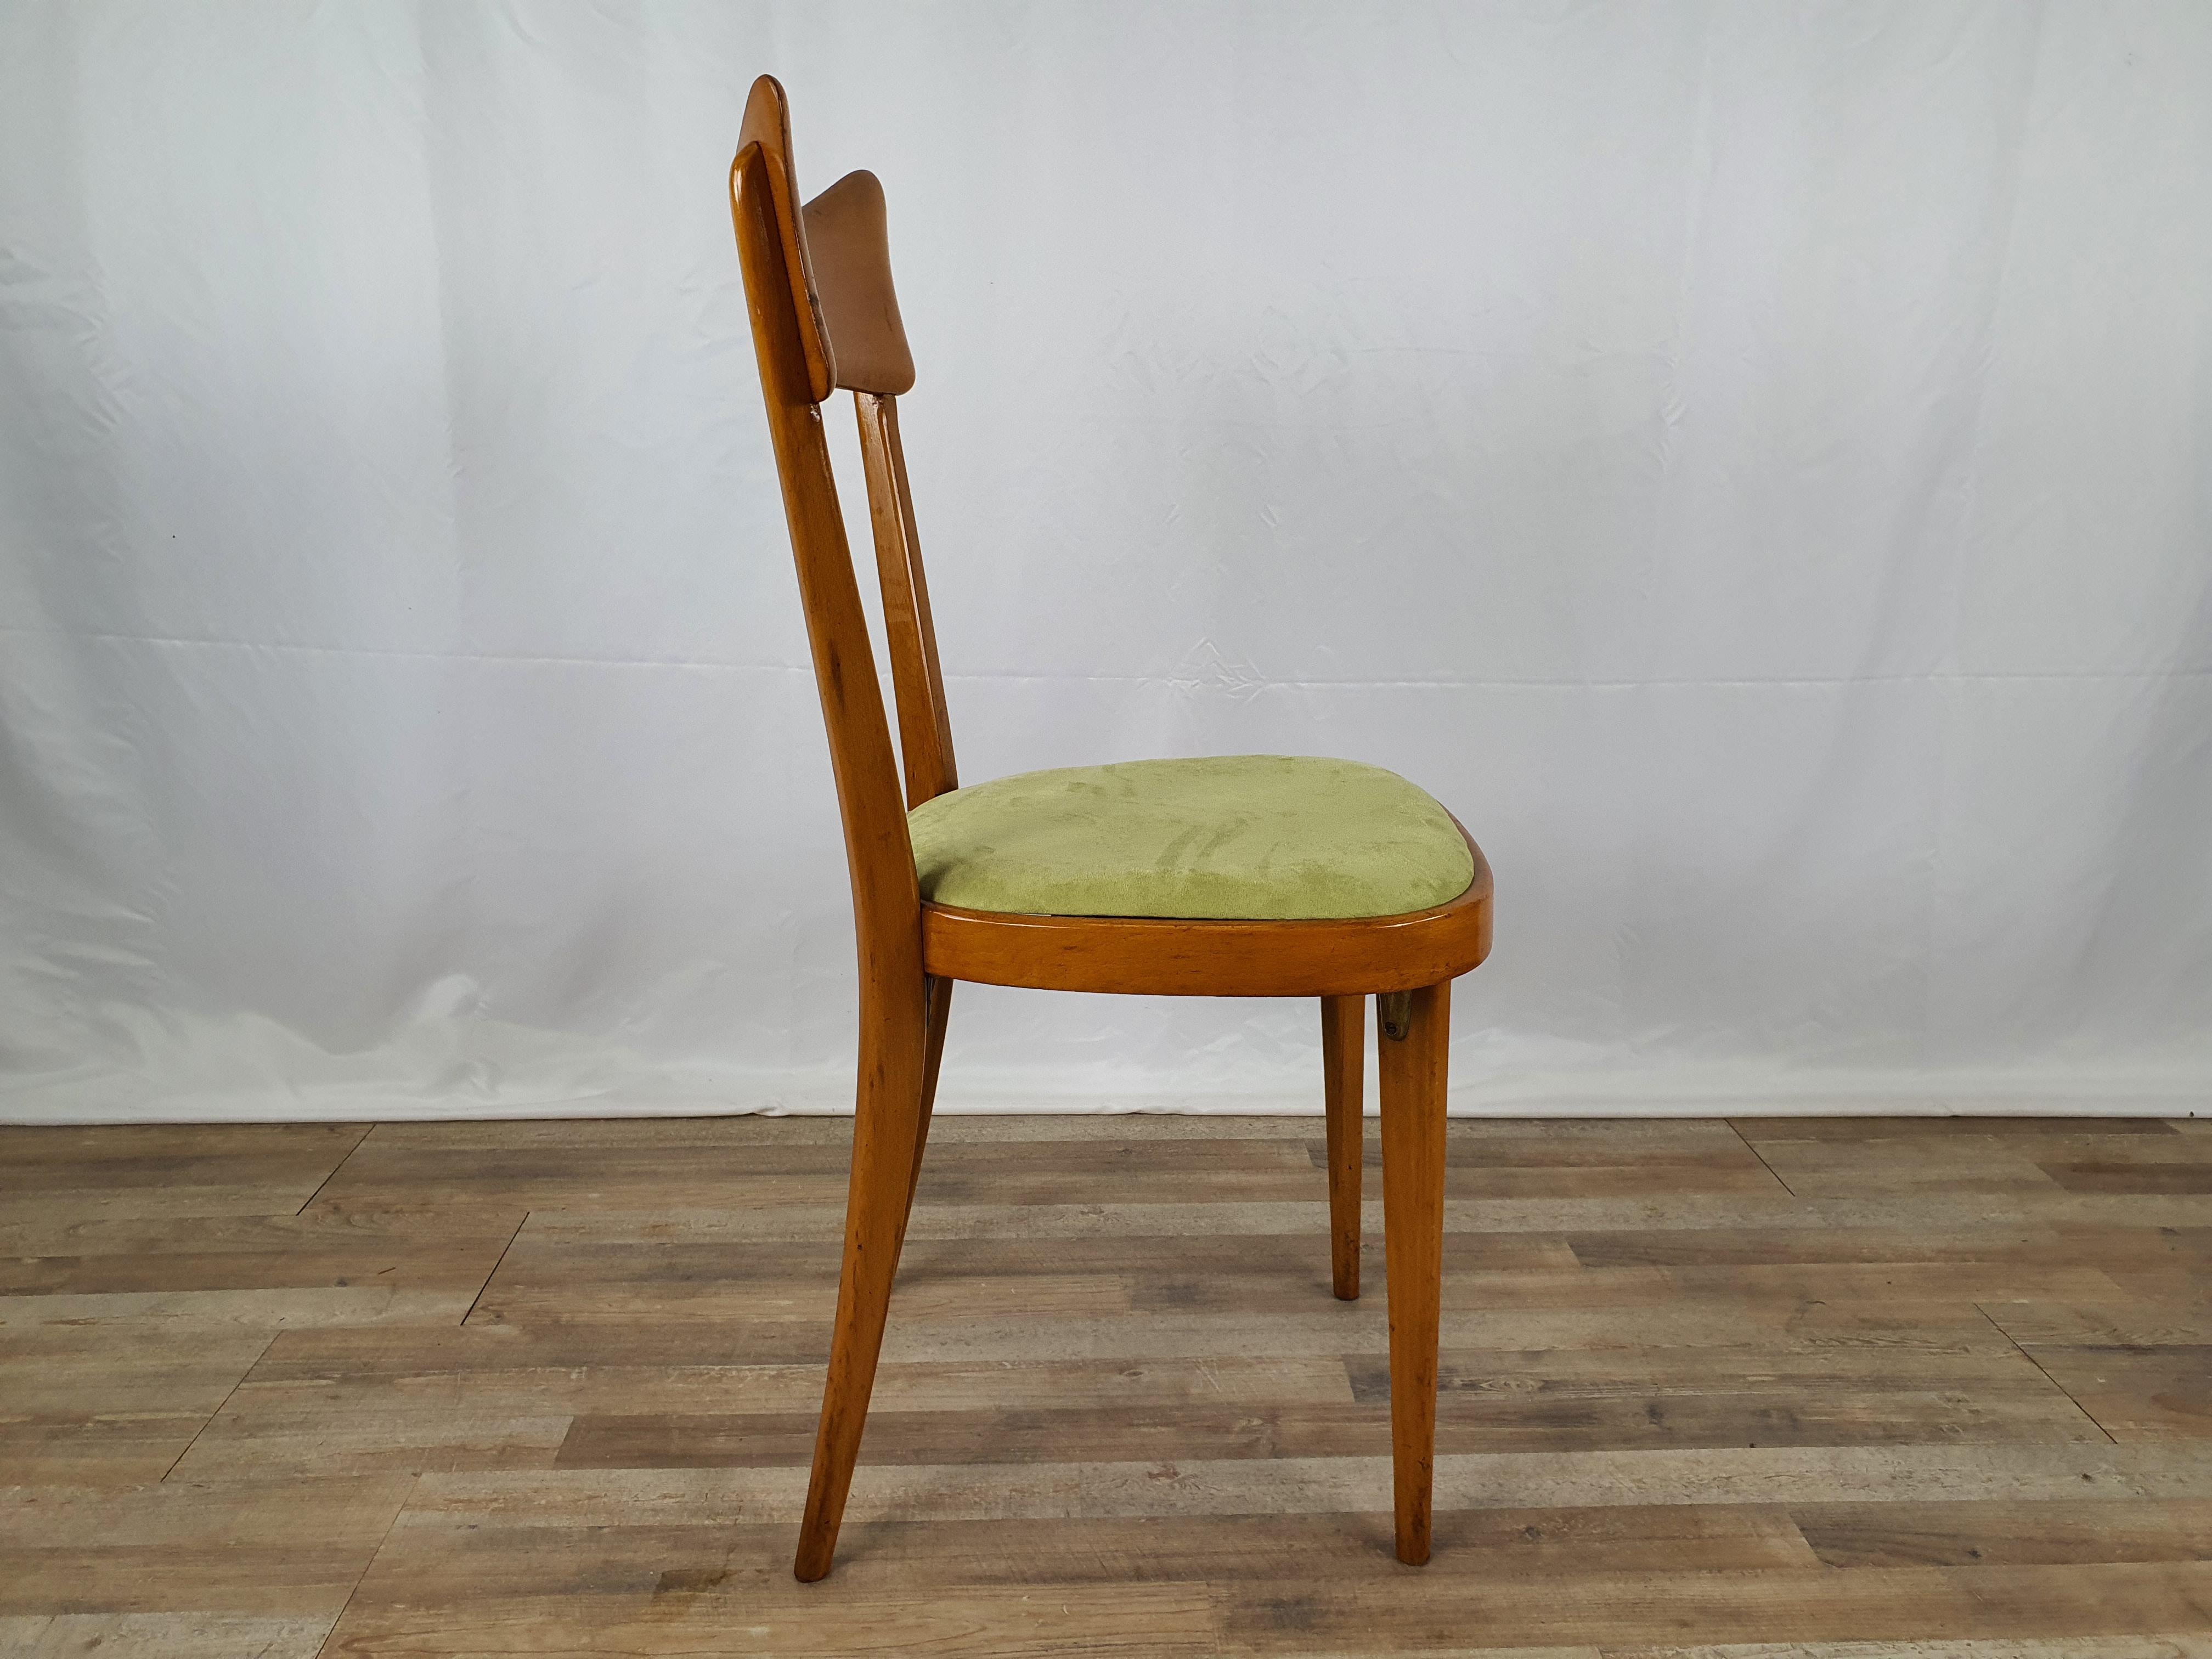 Single chair in blond beech with upholstered seat, Italian production from the early 1950s.

The chair lends itself to any occasion and context as a modern and functional design element.

The padding is new, the chair instead has been polished